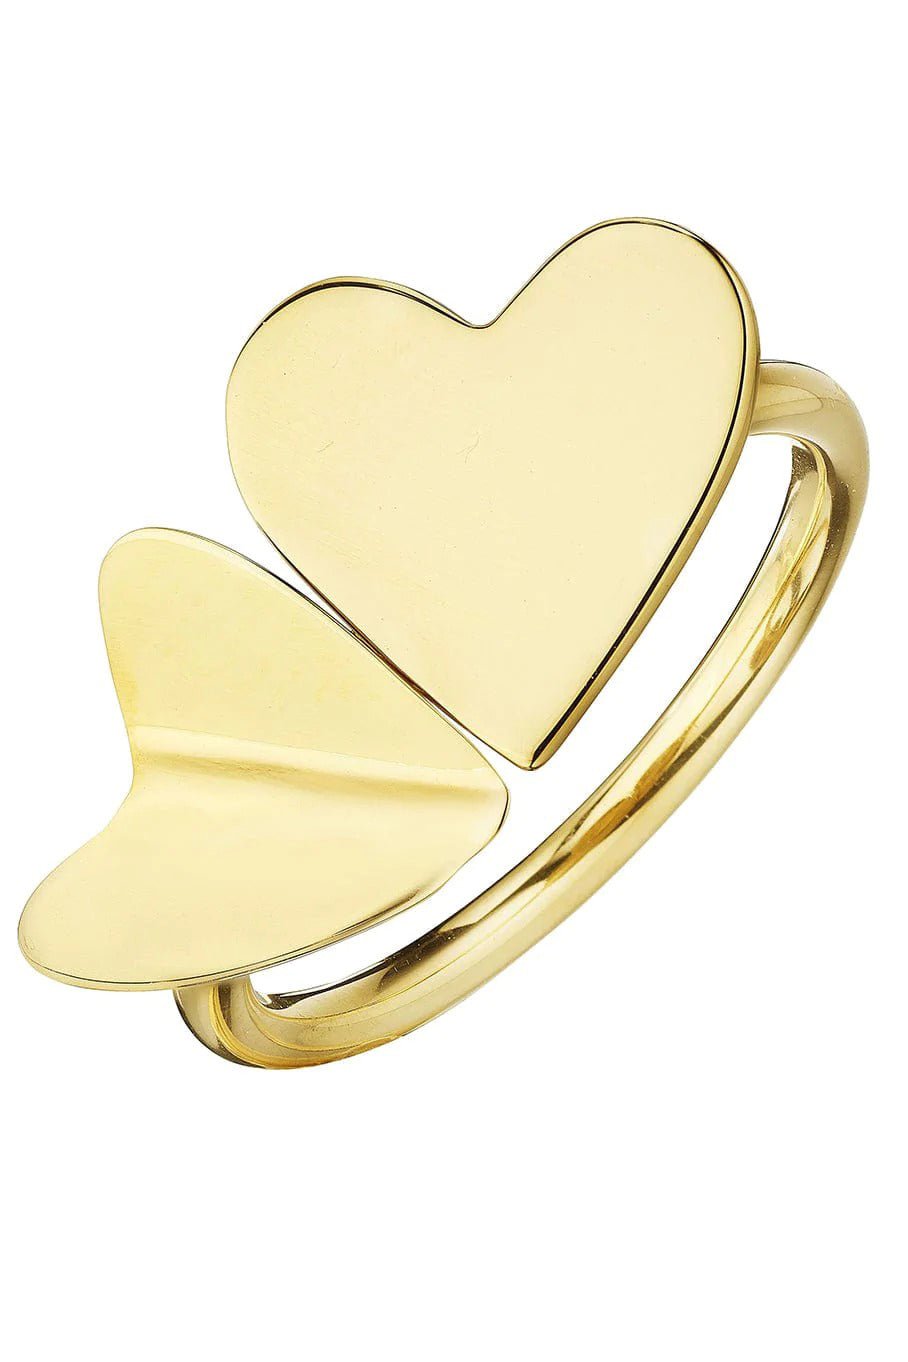 CADAR-Double Folded Heart Ring-YELLOW GOLD